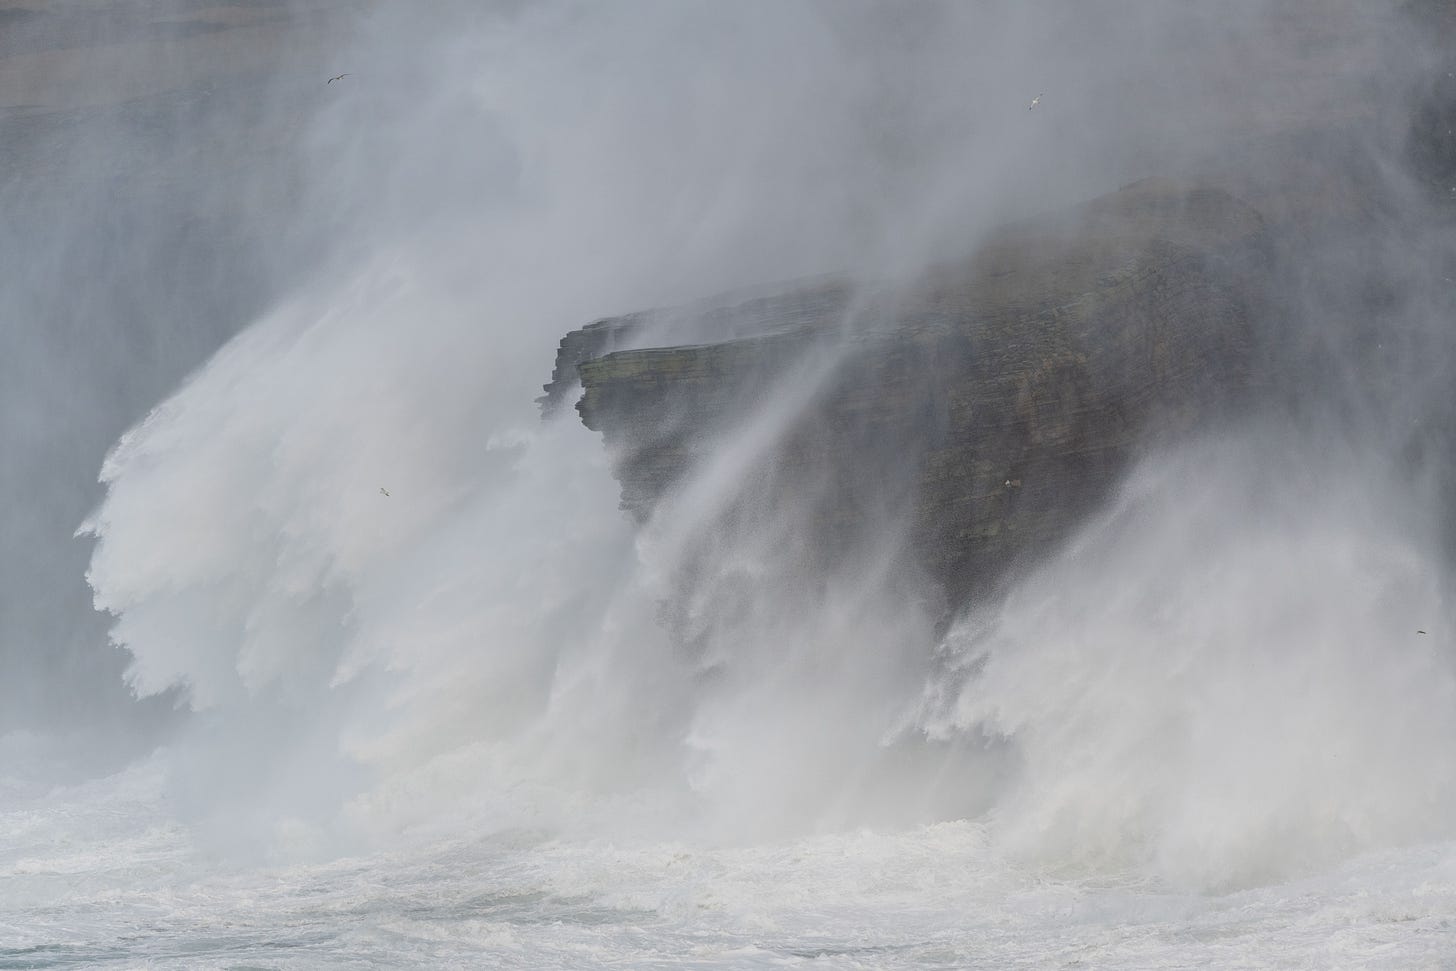 Huge waves crashing over tall cliffs with clouds of seaspray